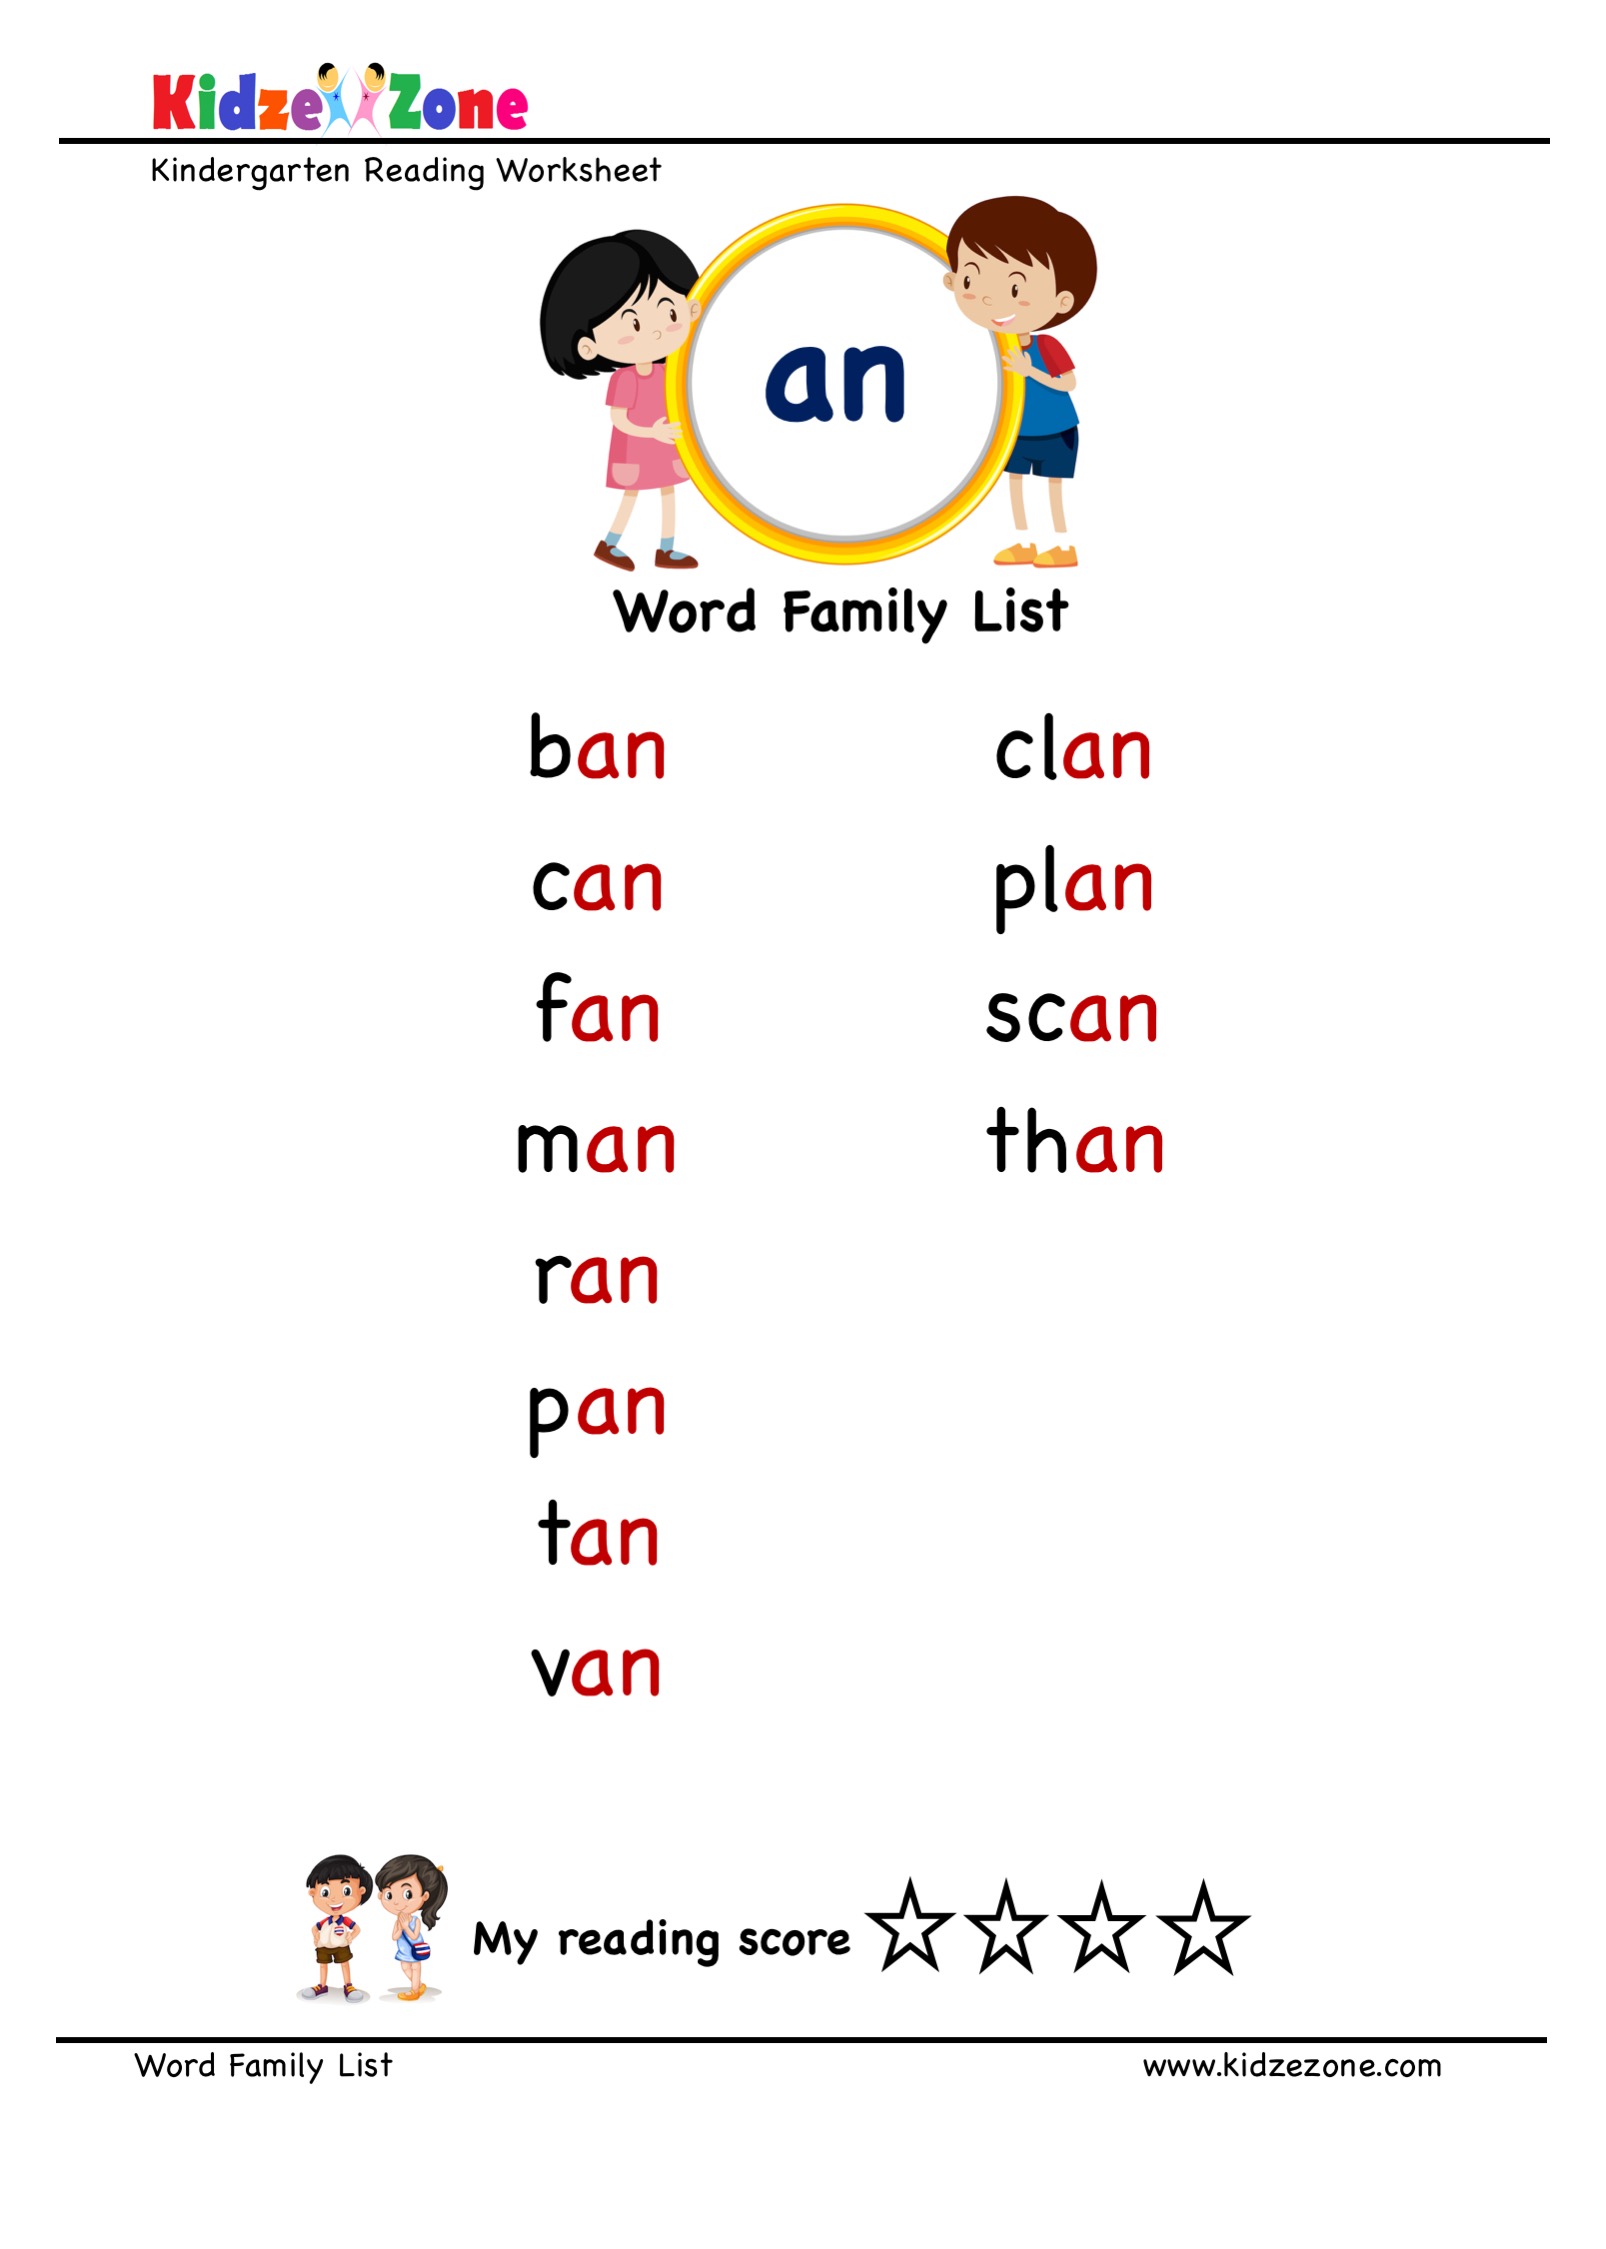 explore-and-learn-words-from-an-word-family-with-word-list-worksheet